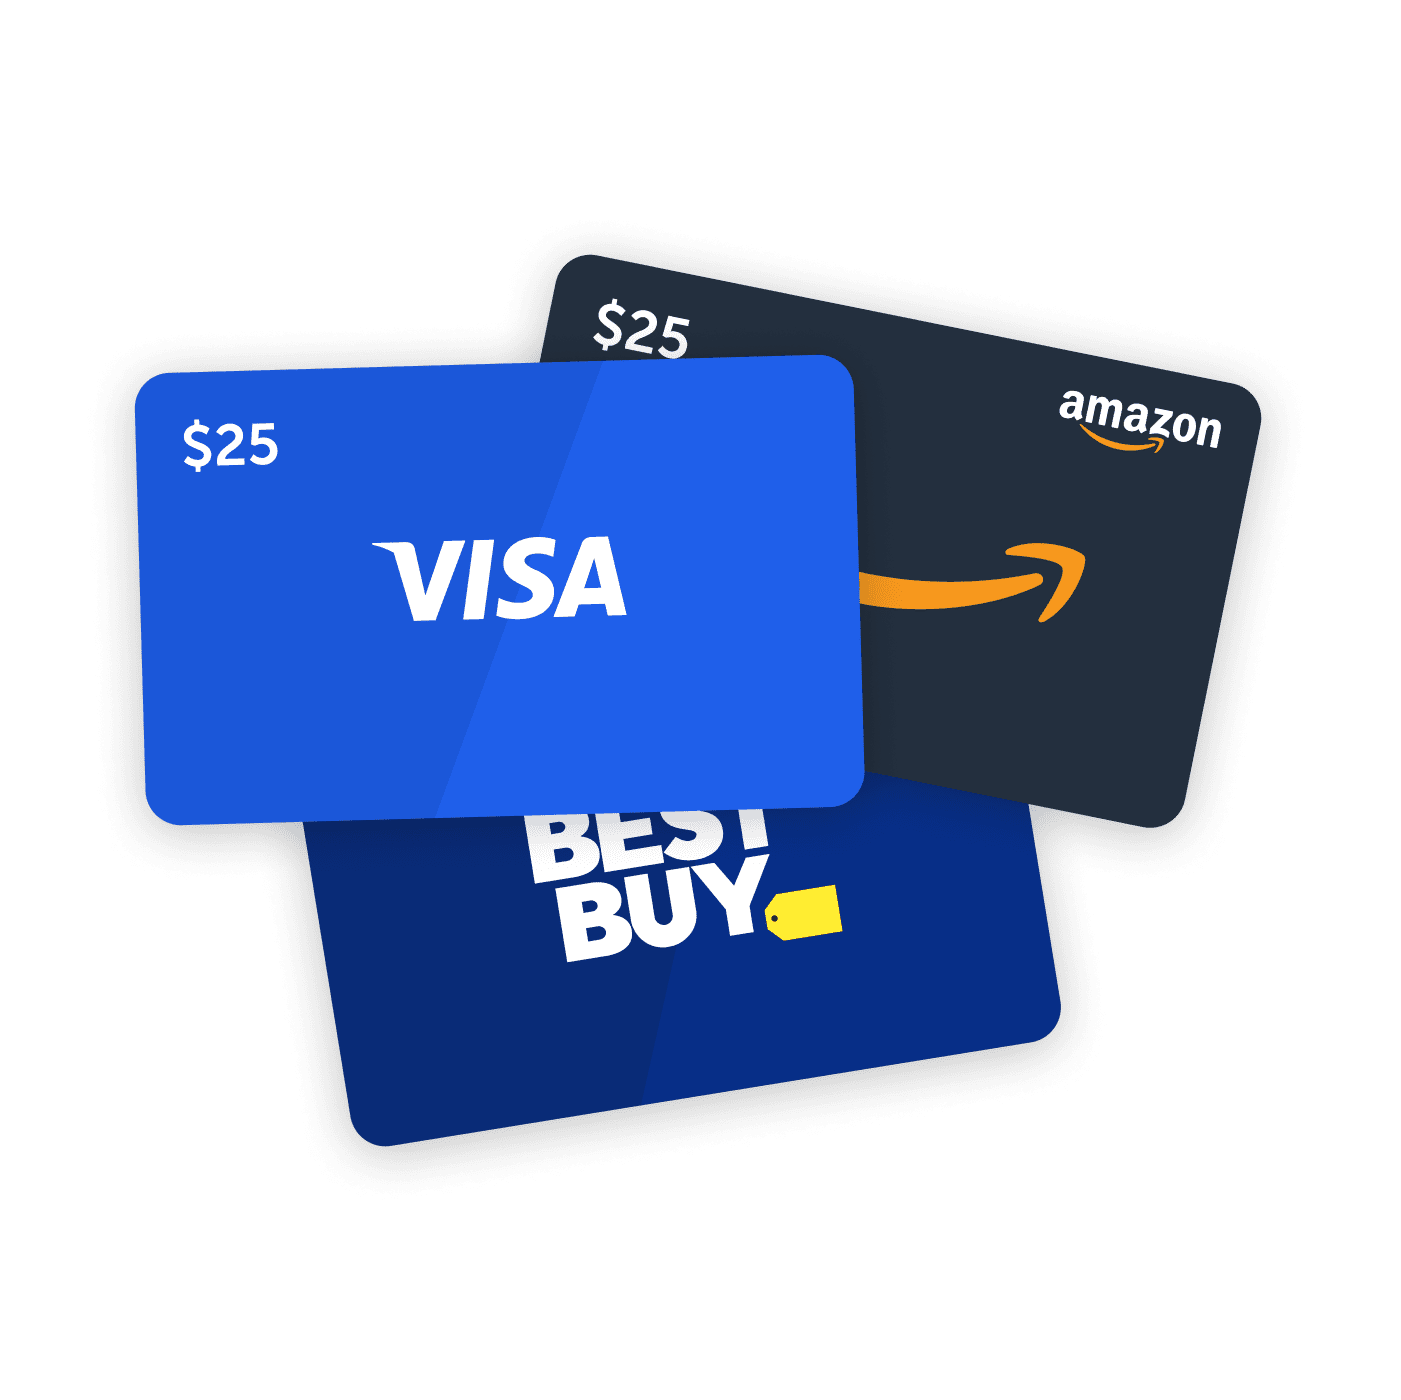 Visa, Amazon, and Best Buy gift cards